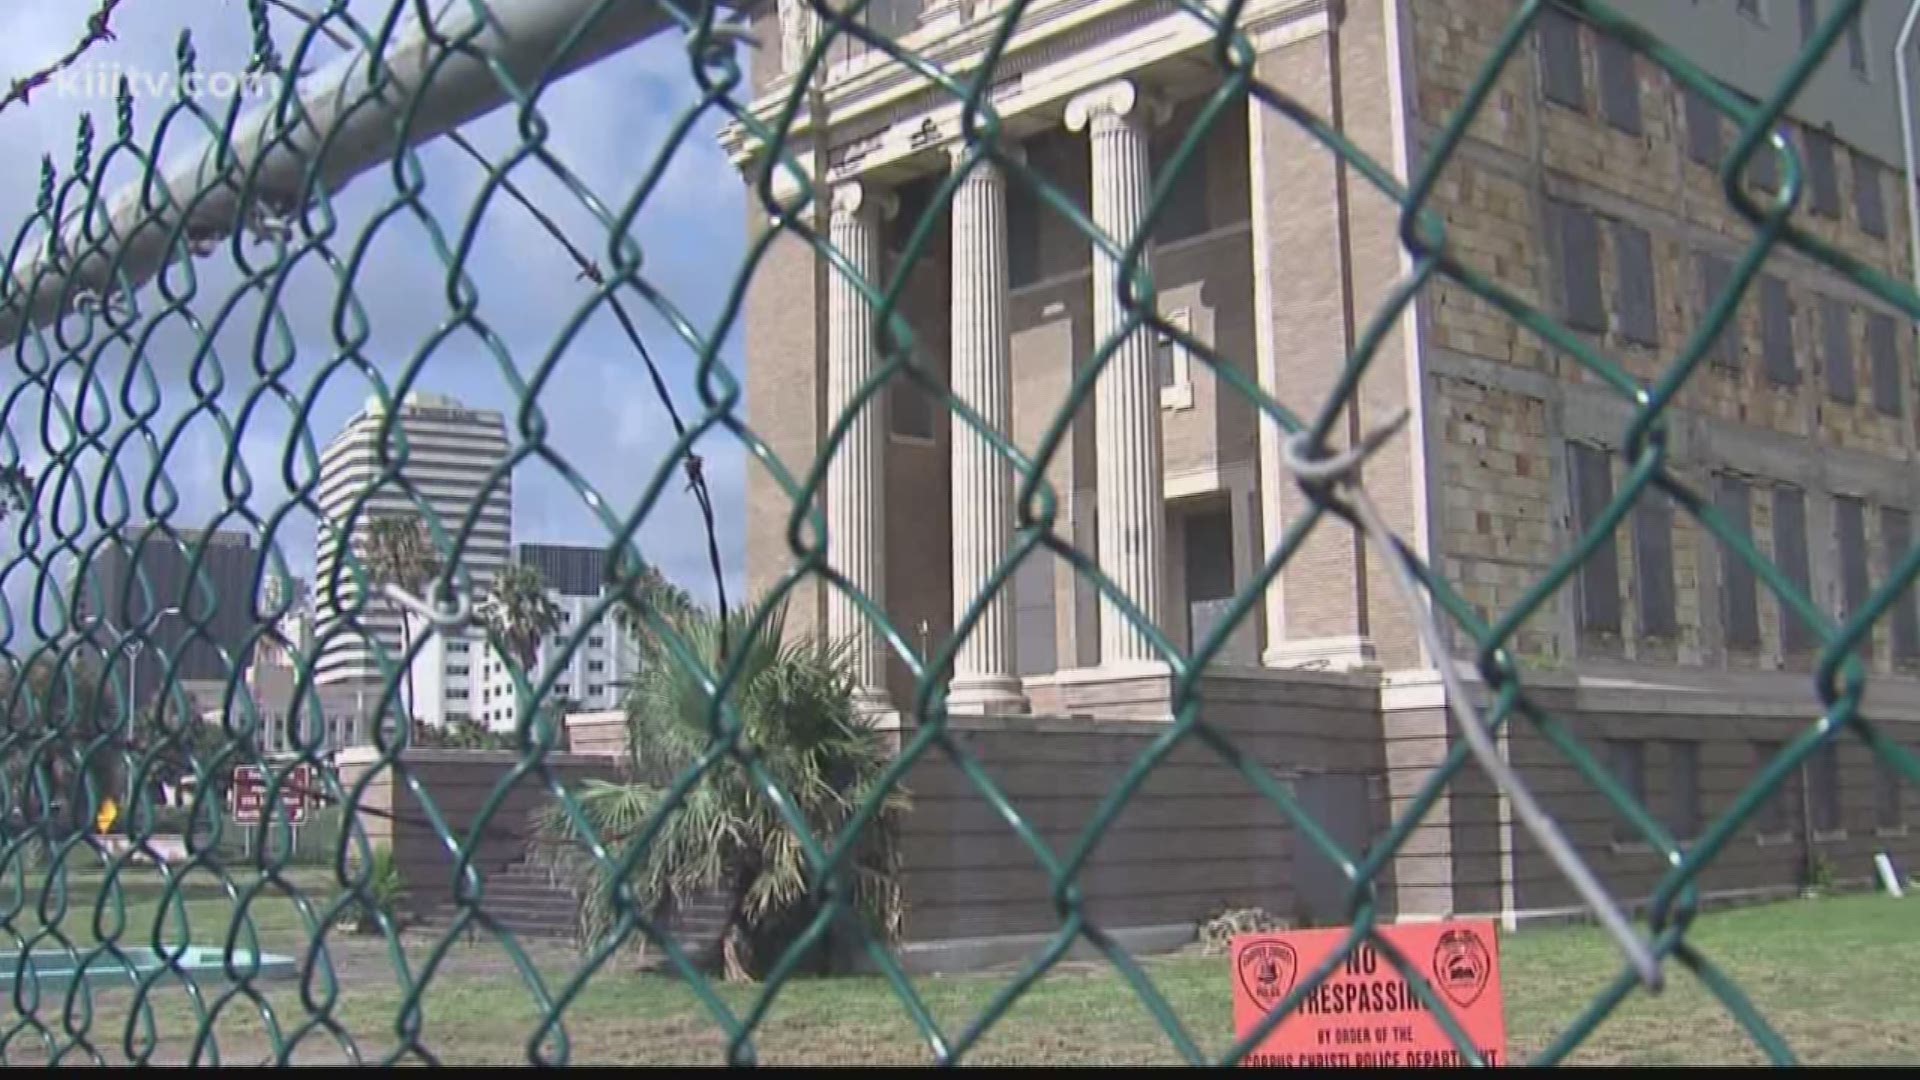 Judge Loyd Neal said the developer could only raise $100,000 of the $1.5 million payment promised to cover outstanding taxes at the old courthouse building.